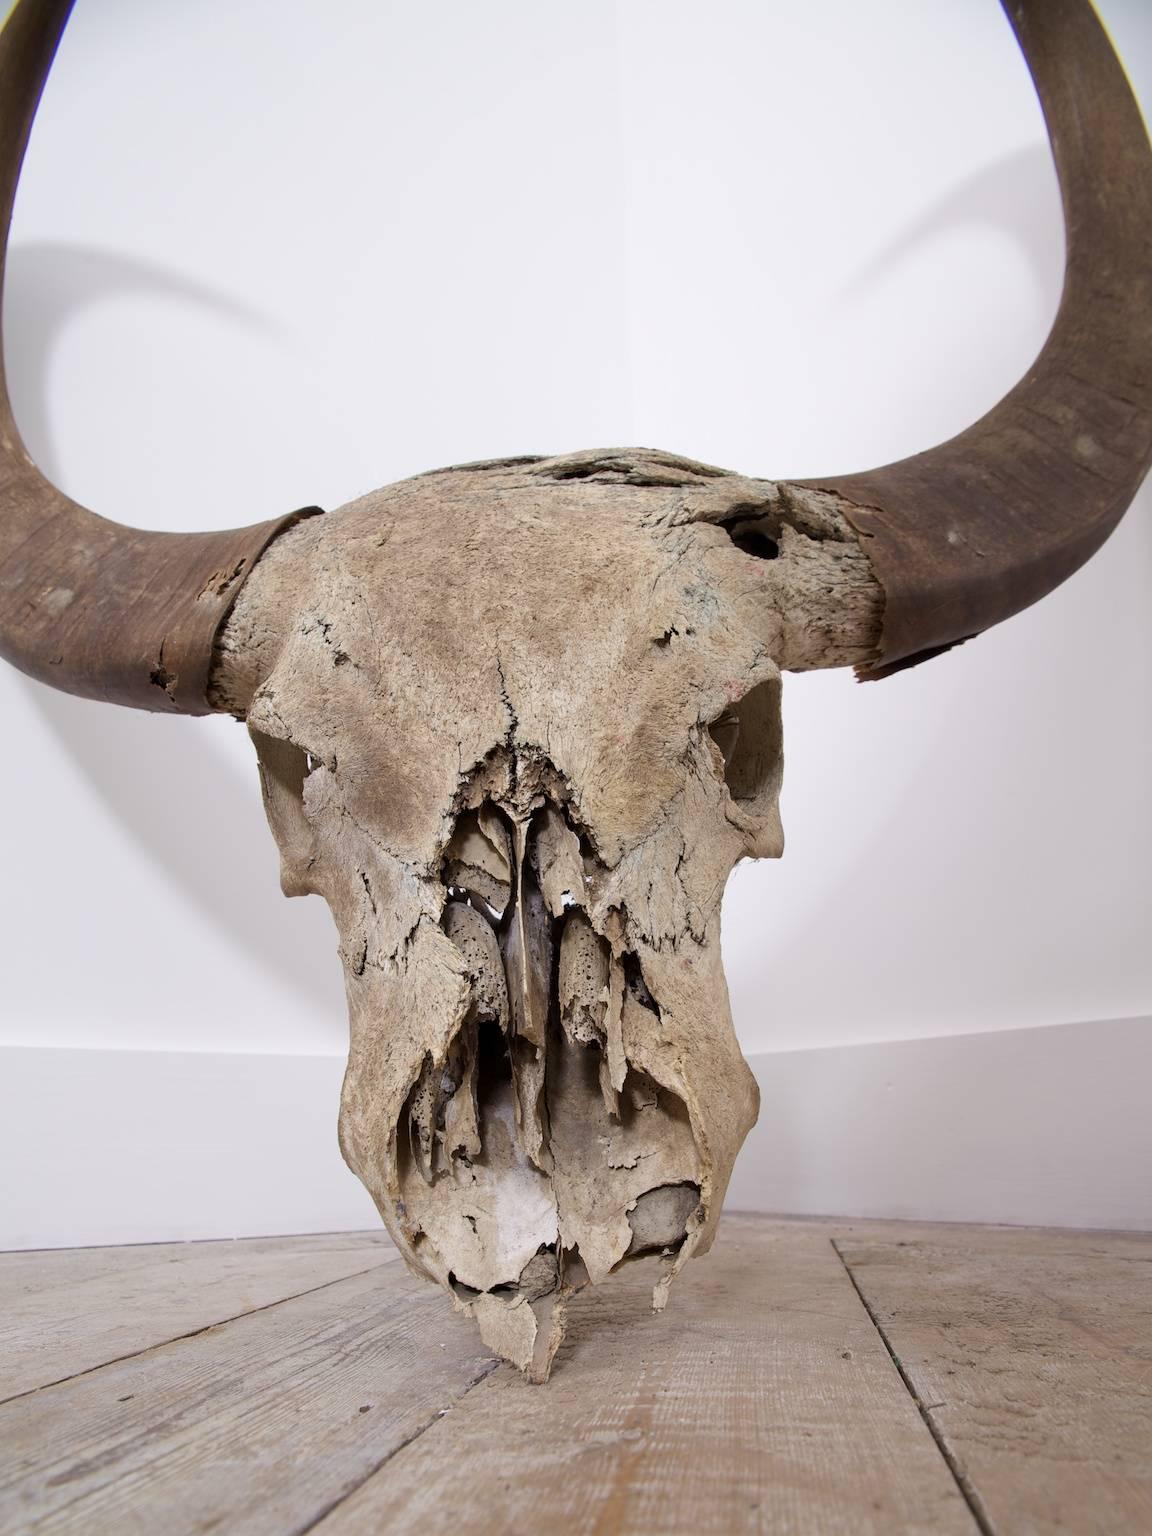 A large unmounted water buffalo skull.

Bullet hole to the top right of skull.

Late 19th century.